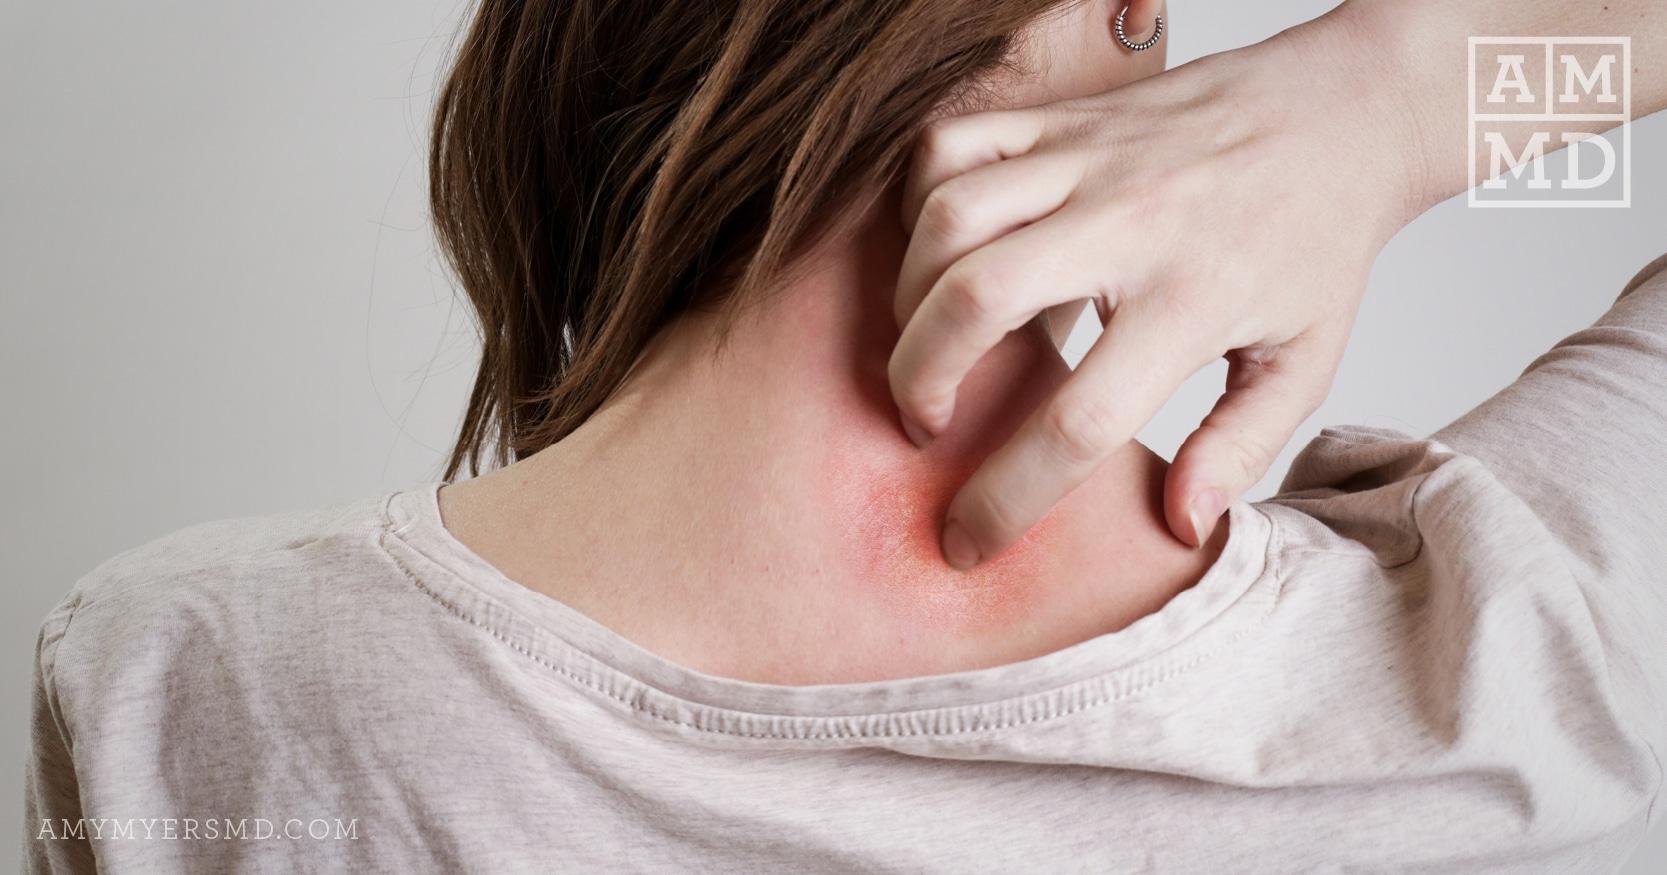 Natural Psoriasis Treatment from the Inside Out - A Woman Scratching a rash on her neck - Featured image - Amy Myers MD®